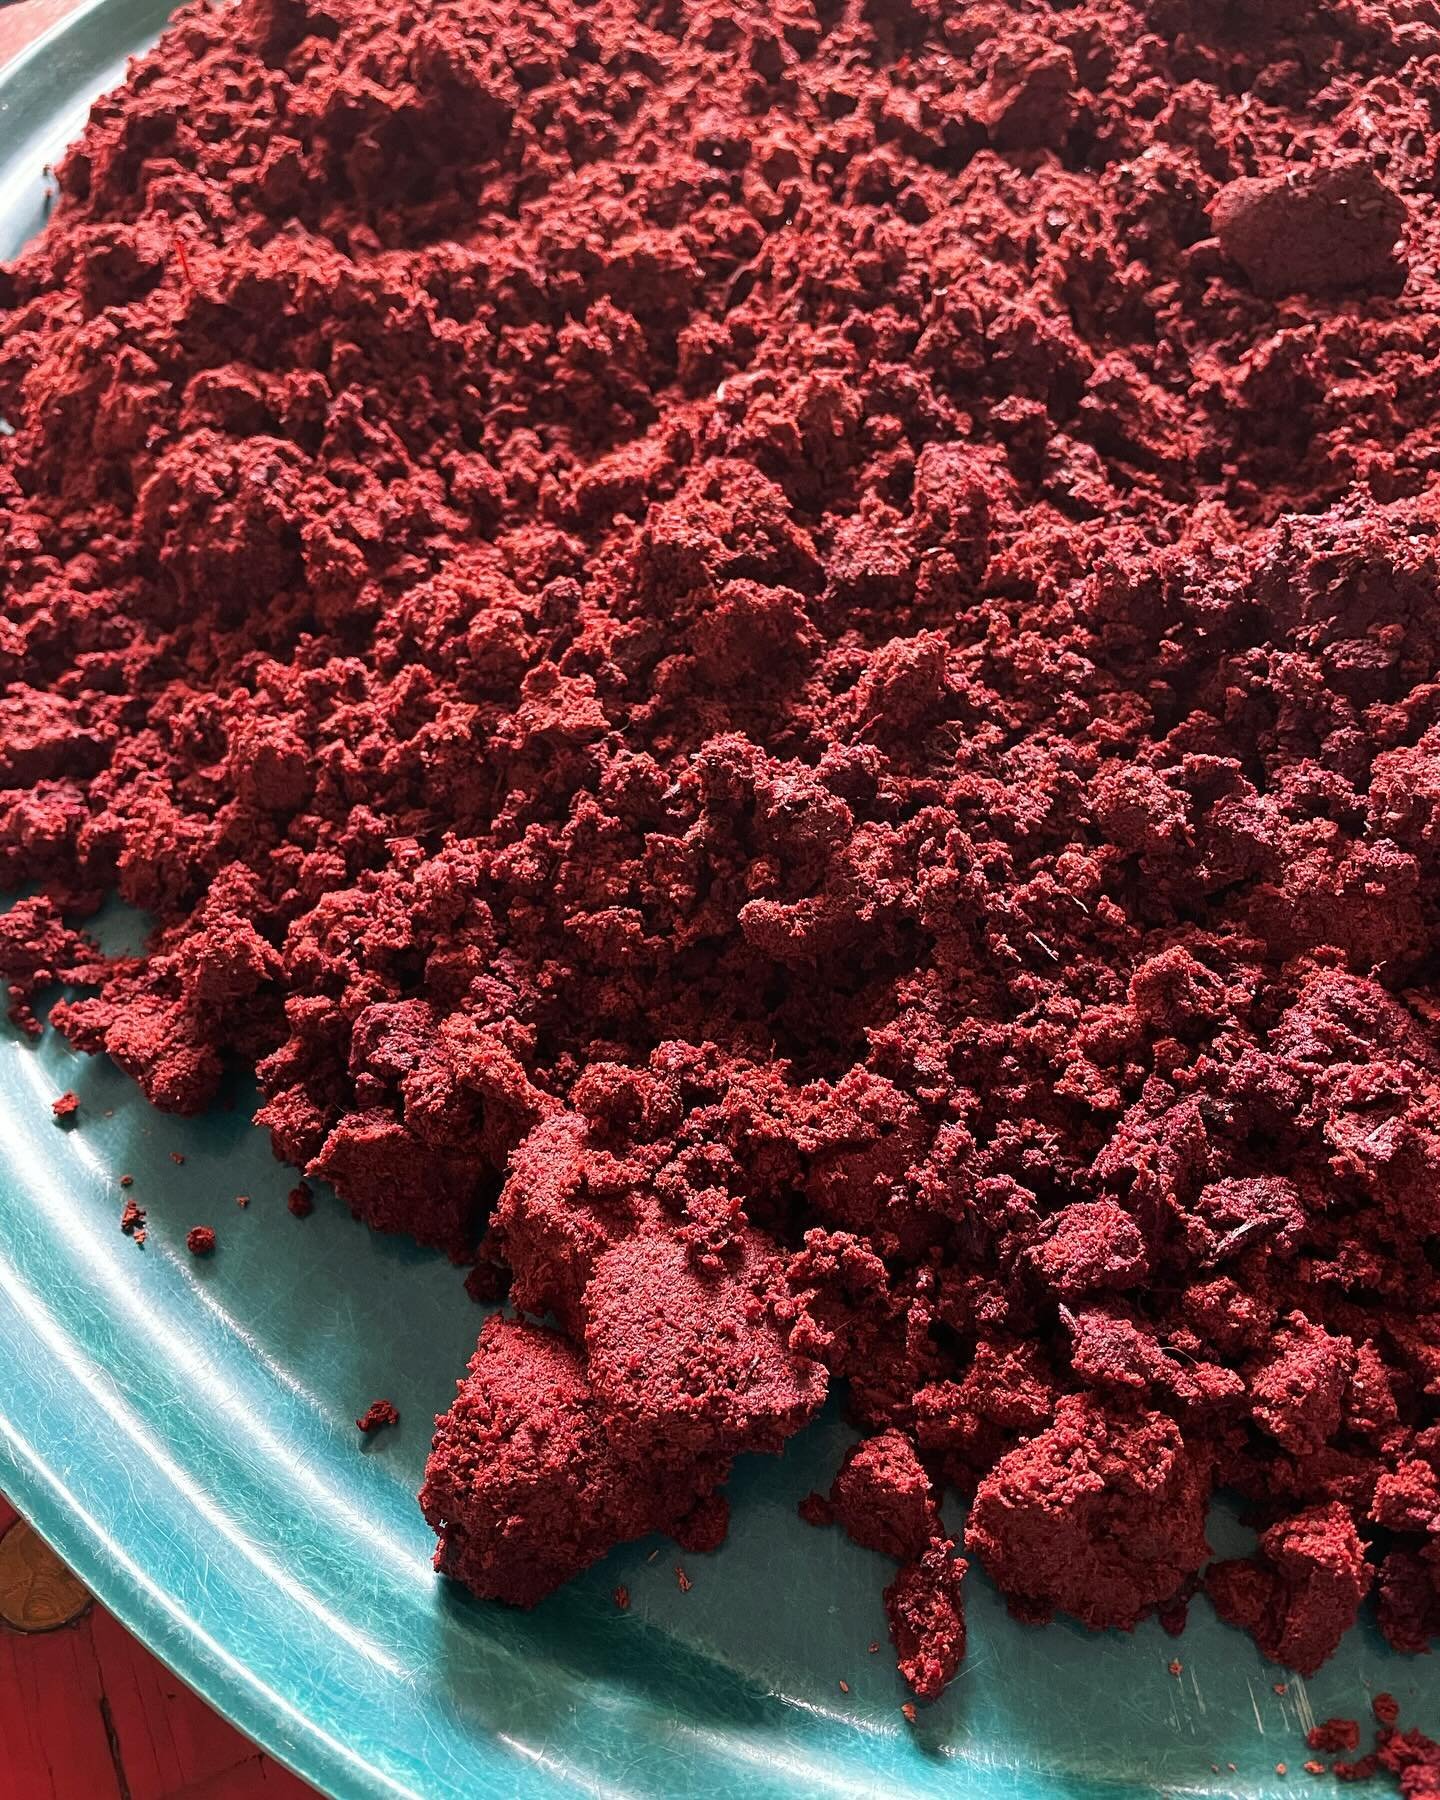 Drying a whole lotta madder root sawdust. This was first used to dye fabric, and then to create lake pigment. 

&hellip;and still bright red. The queen is amazing. 

After being dried this will find its way into a collaborative art exhibition which w